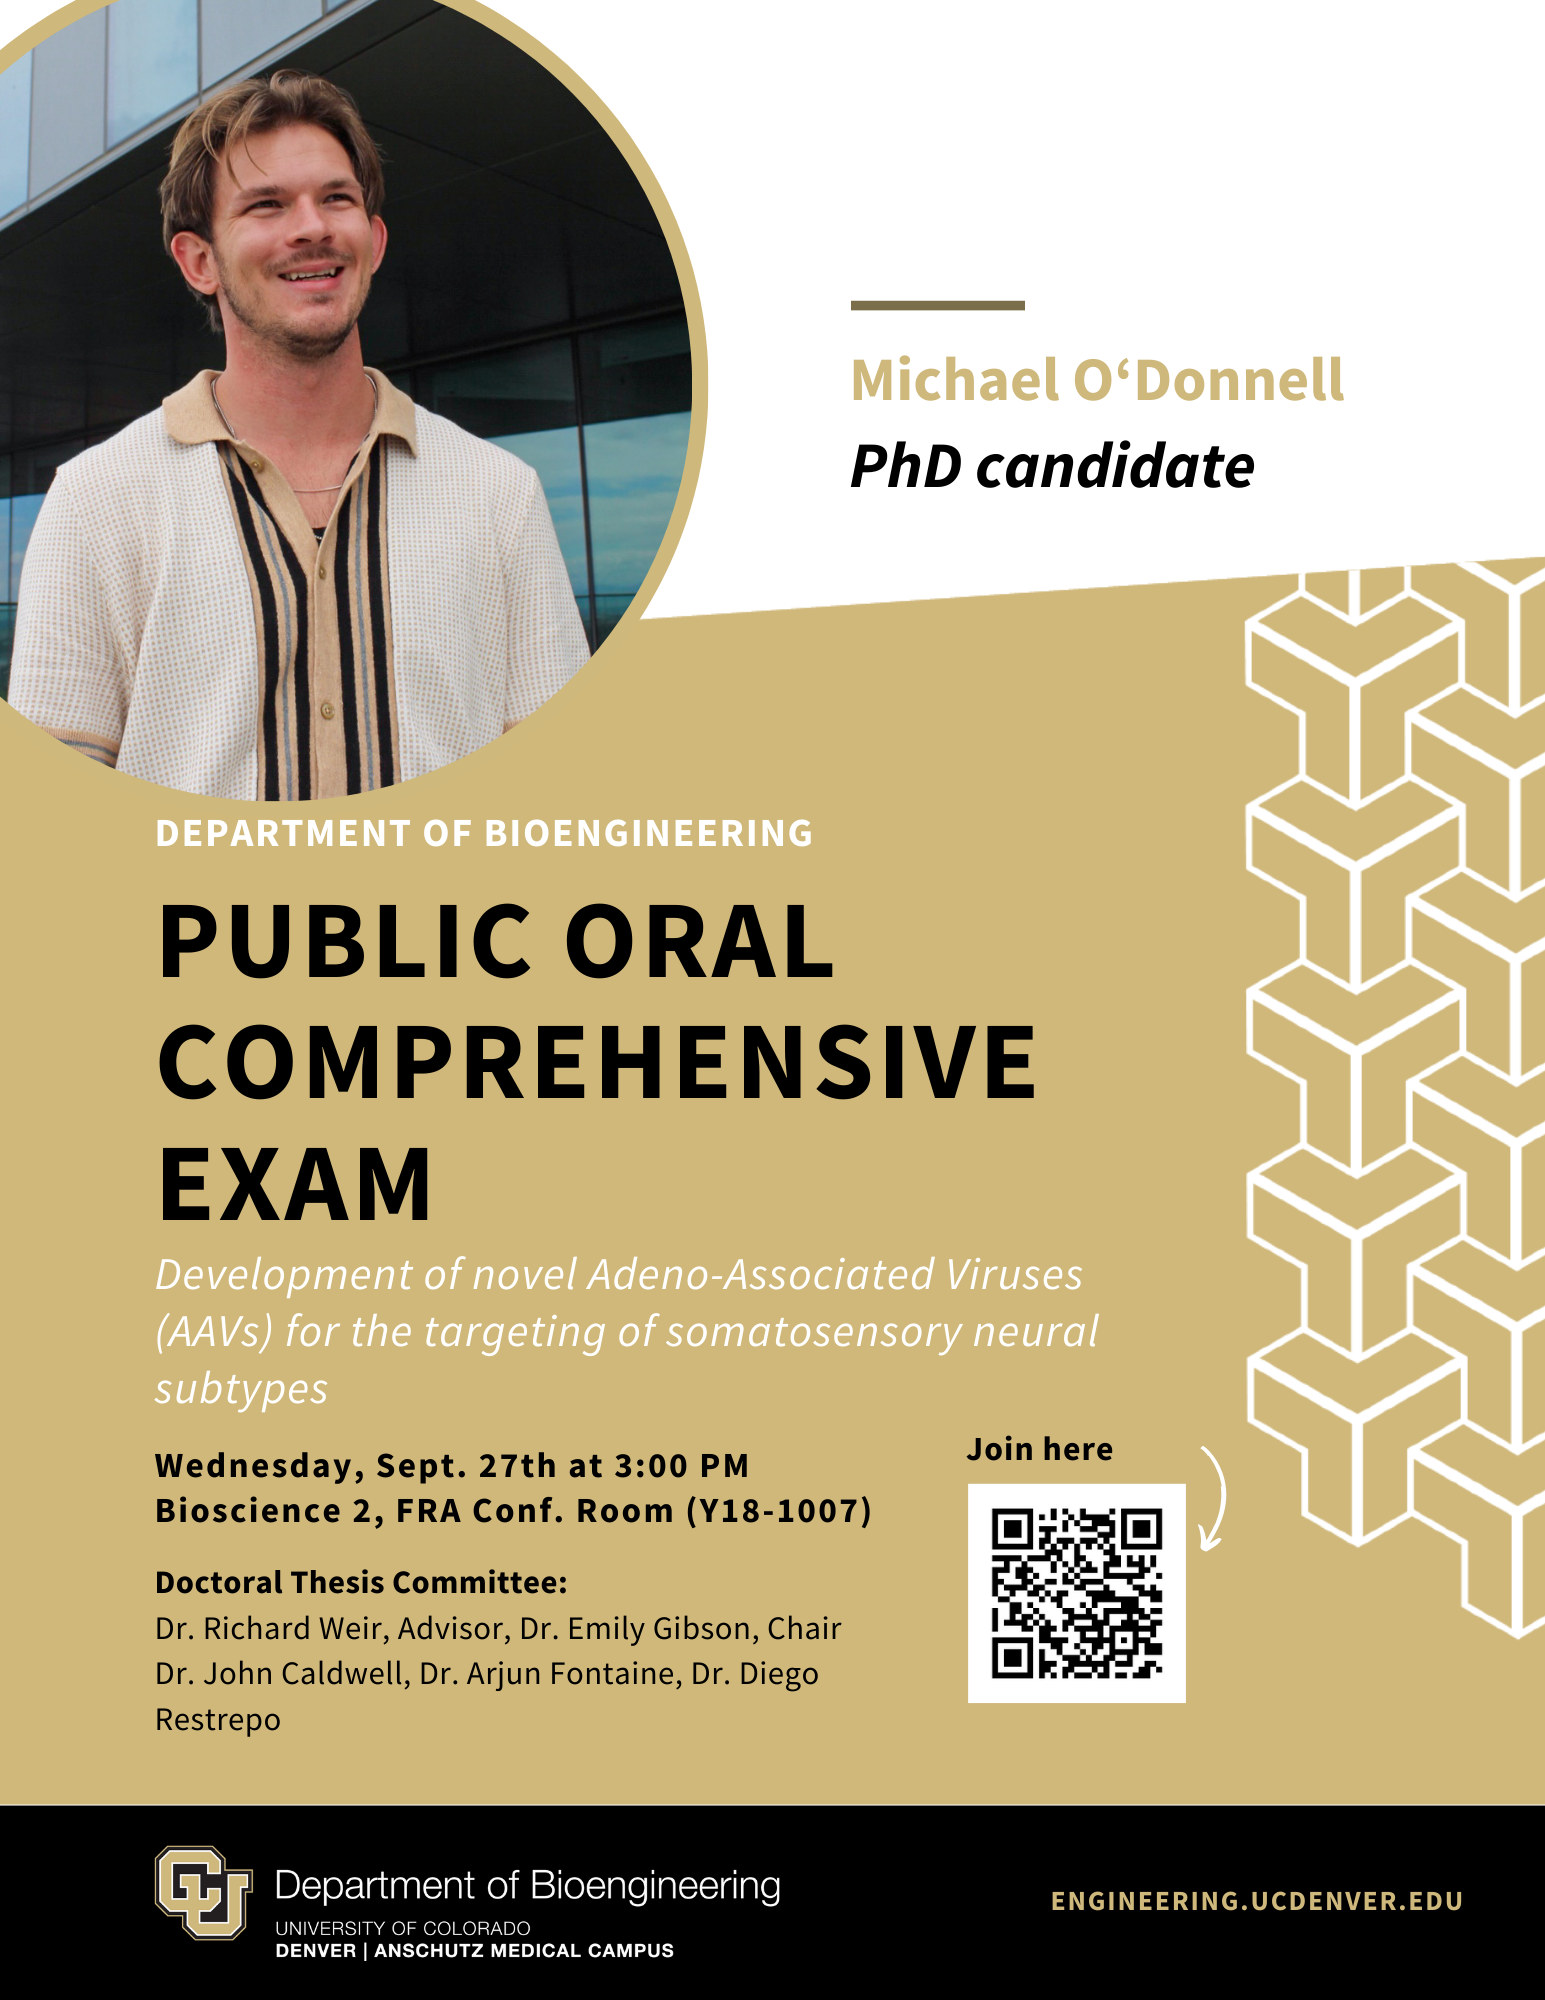 Michael O'Donnell announcement